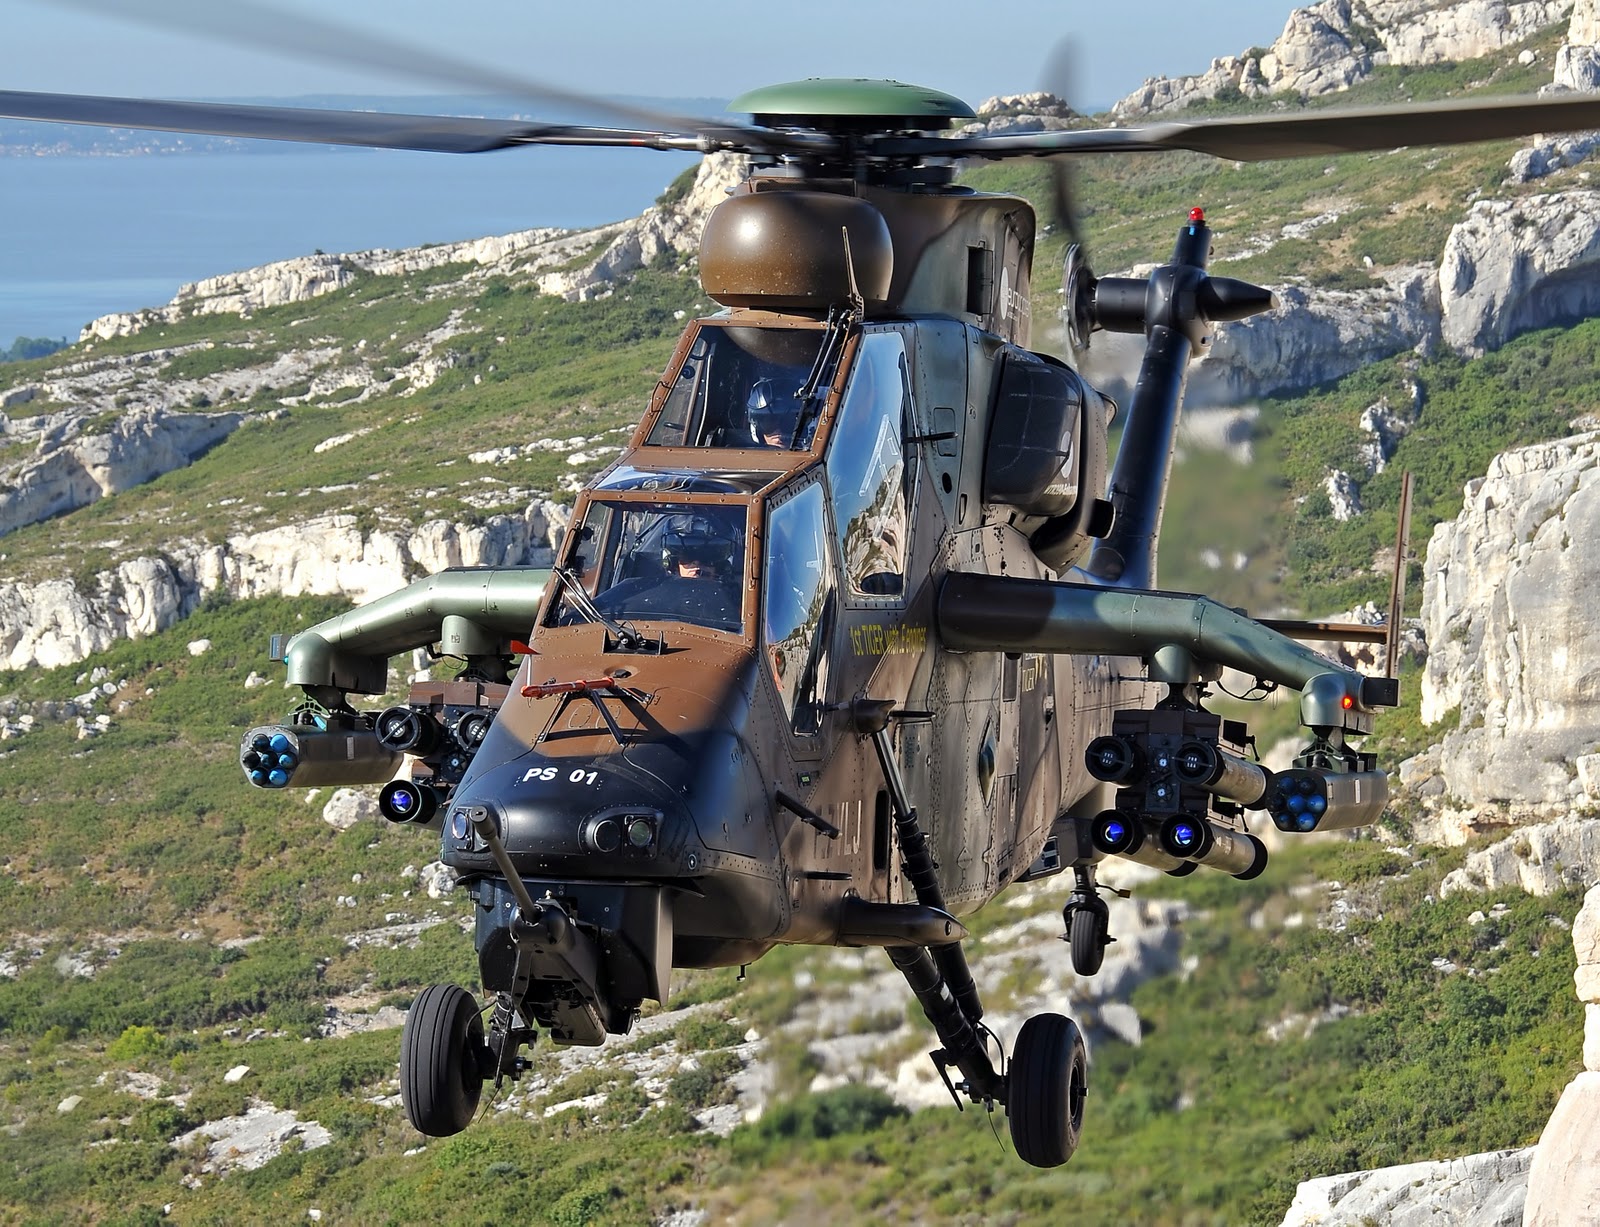 O Tiger da Airbus Helicopters seria o outro forte candidato. (Imagem: Airbus Helicopters)